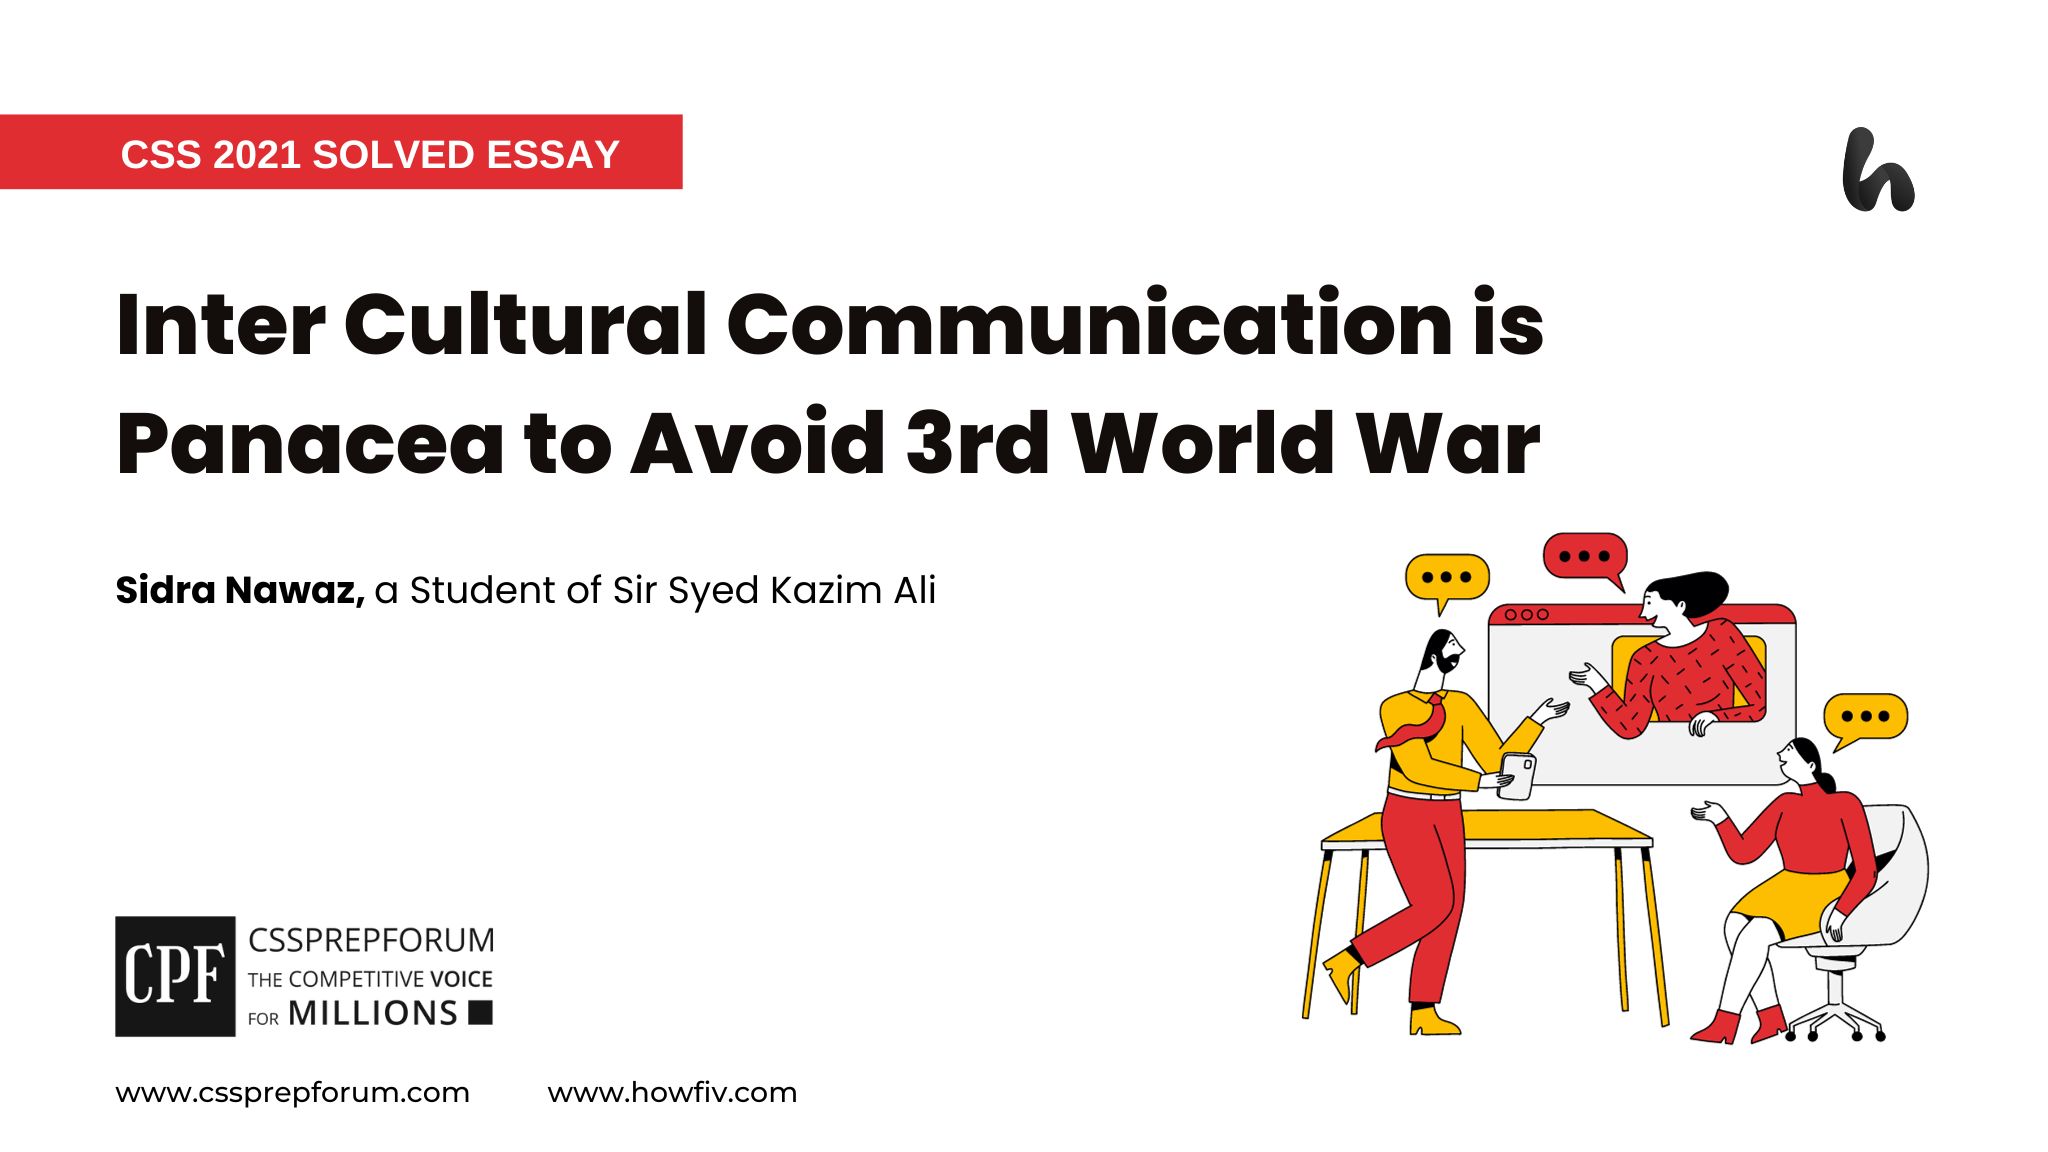 Inter Cultural Communication is Panacea to Avoid 3rd World War